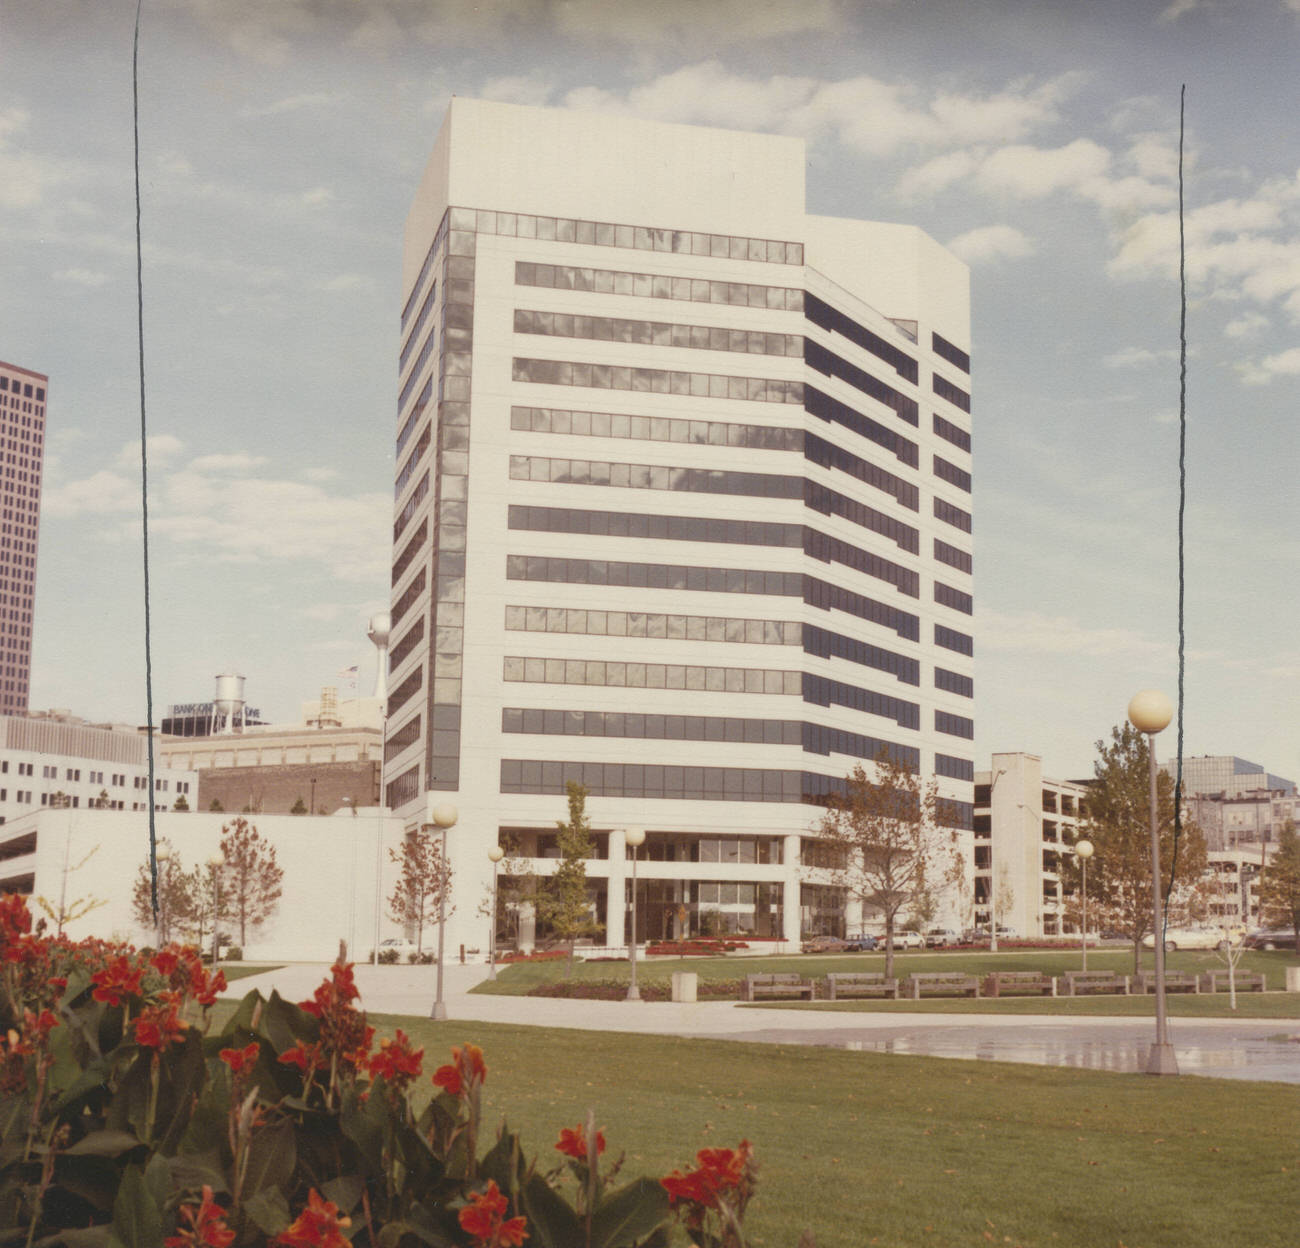 Columbia Gas of Ohio building, opened on July 25, 1983, with 259,000 square feet on 14 floors, cost $30 million, view from Bicentennial Park, Circa 1980s